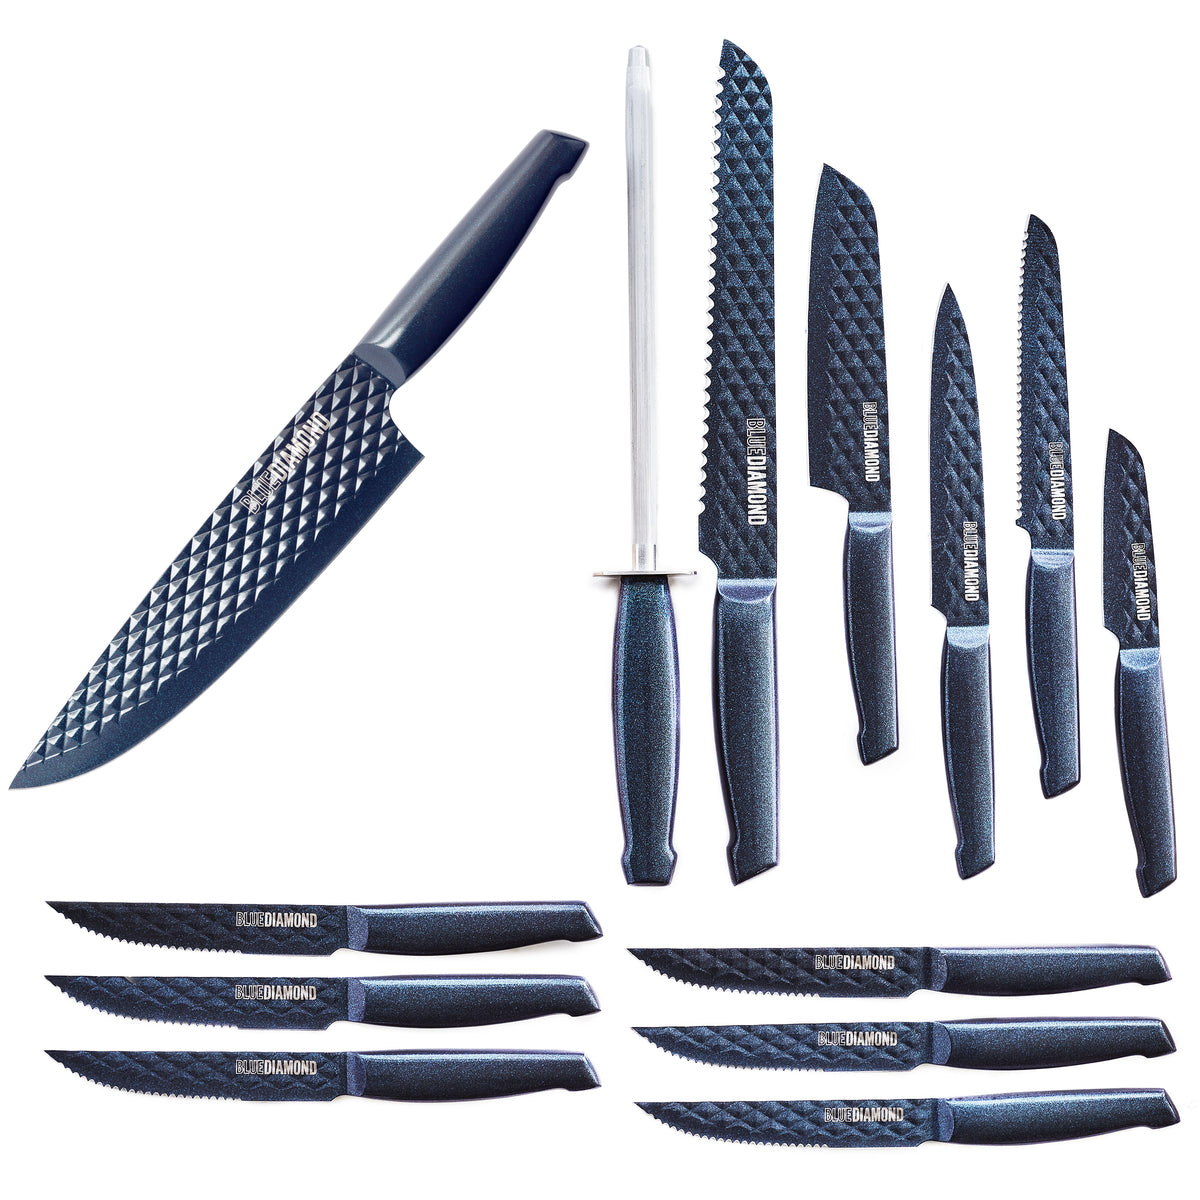 6 Piece Blue Soft Touch Non-Stick Paring Knife & Sheath Set, Plastic Sold by at Home